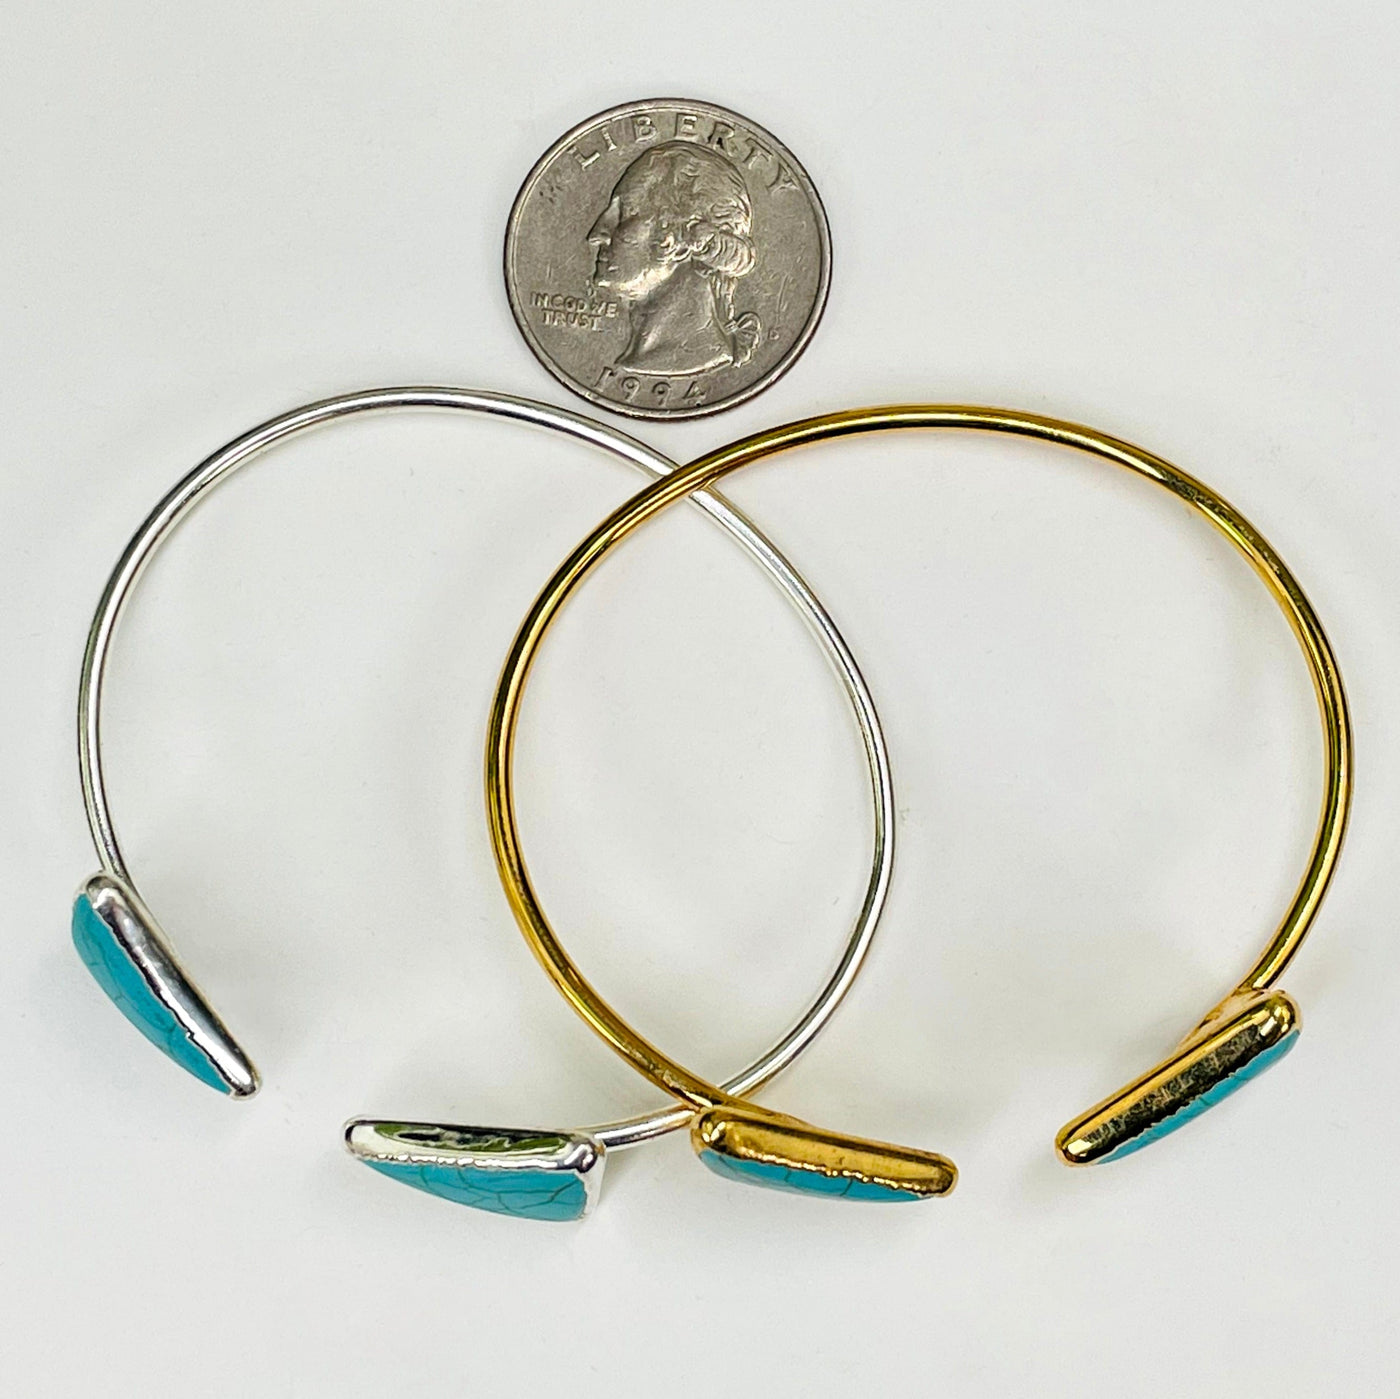 overhead view of one gold and one silver turquoise howlite double triangle adjustable bracelets with a quarter for size reference